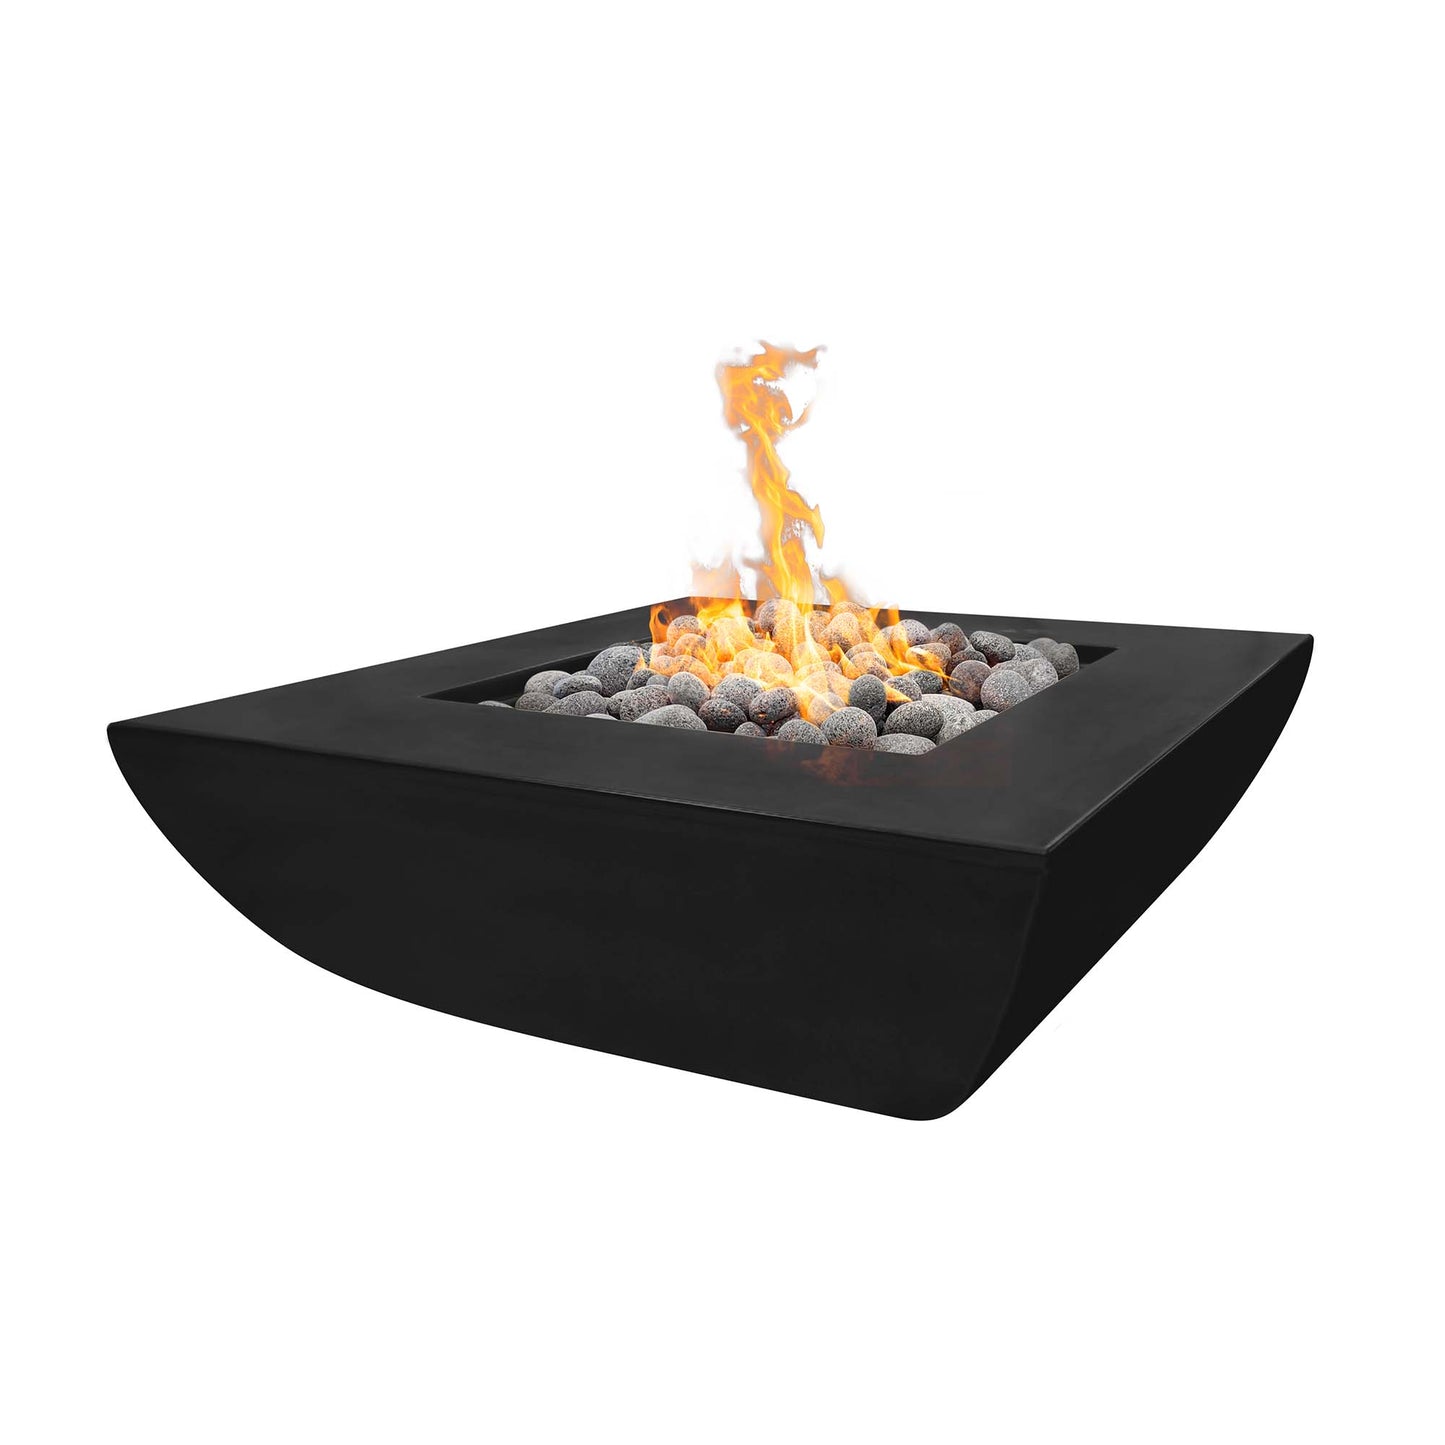 The Outdoor Plus Square Avalon 42" Chestnut GFRC Concrete Liquid Propane Fire Pit with 110V Electronic Ignition